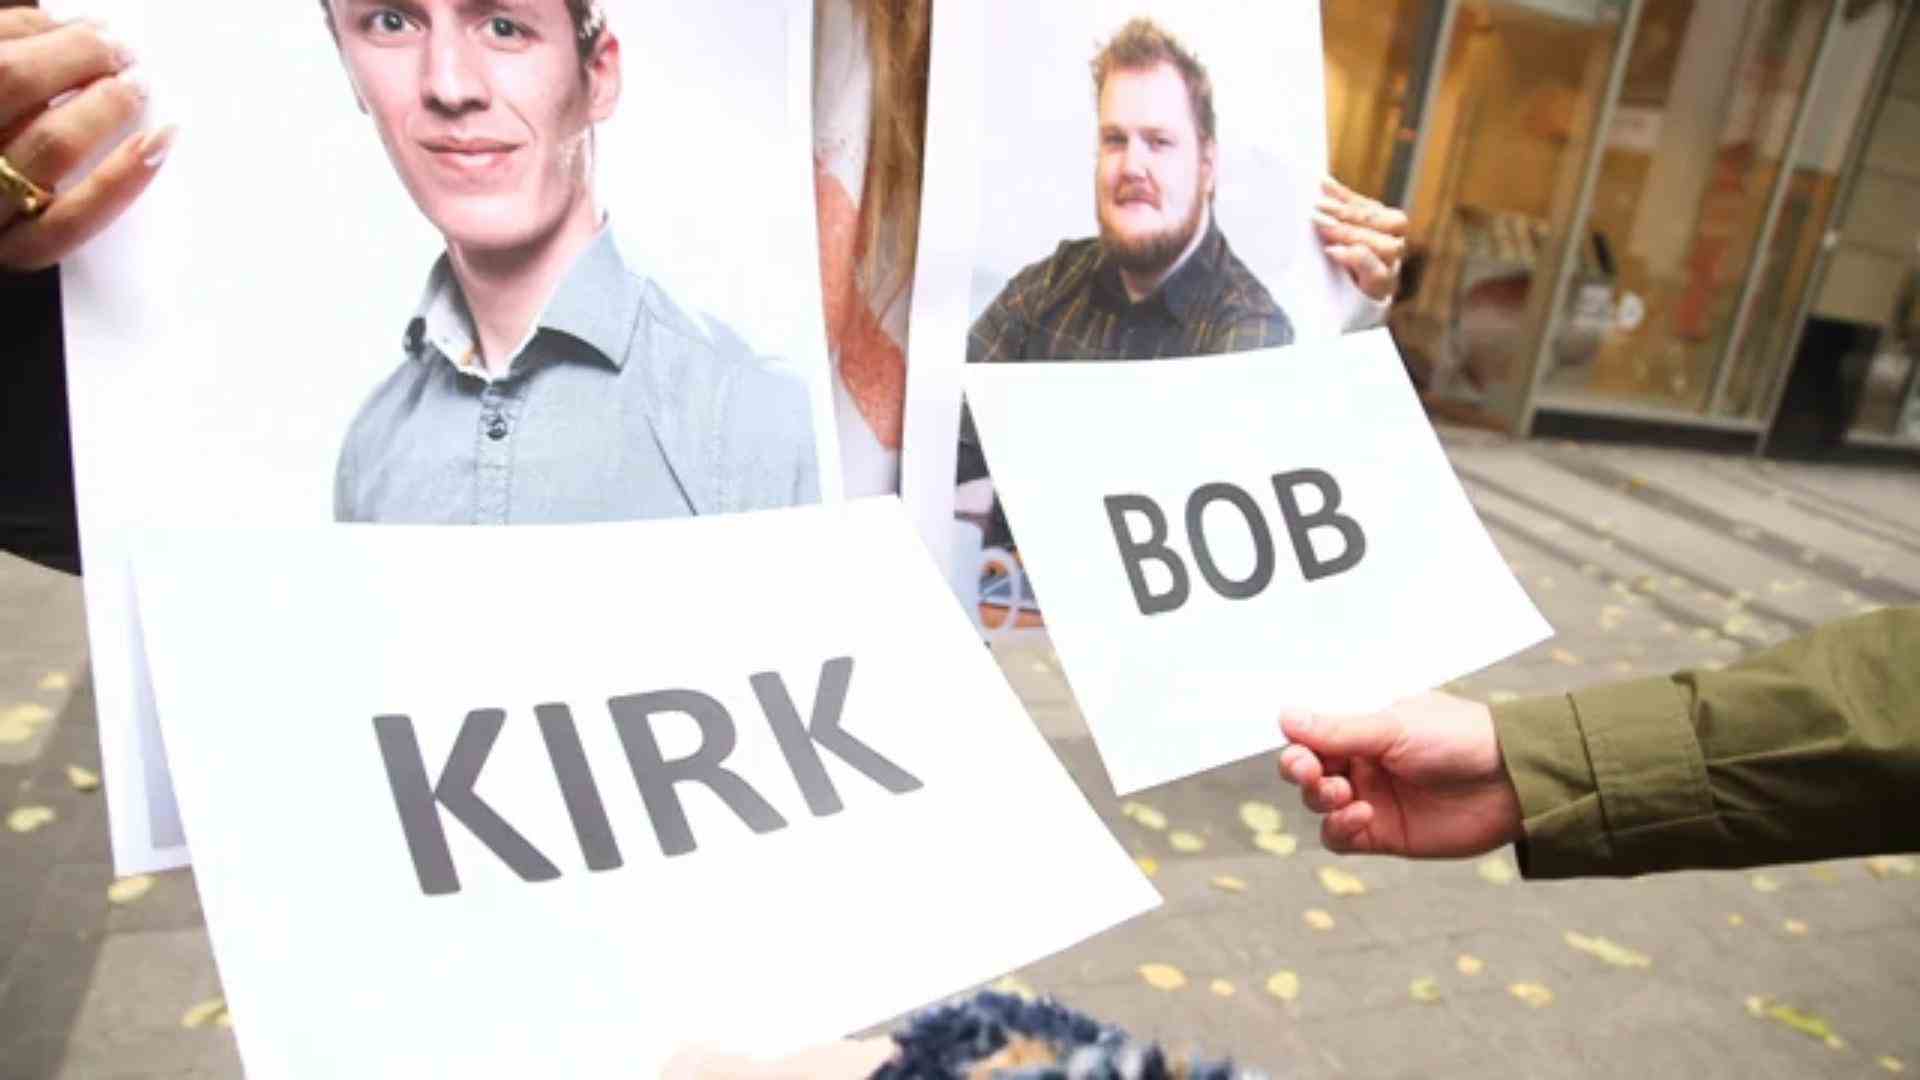 Even with names we have hallucinations!  Kirk or Bob?